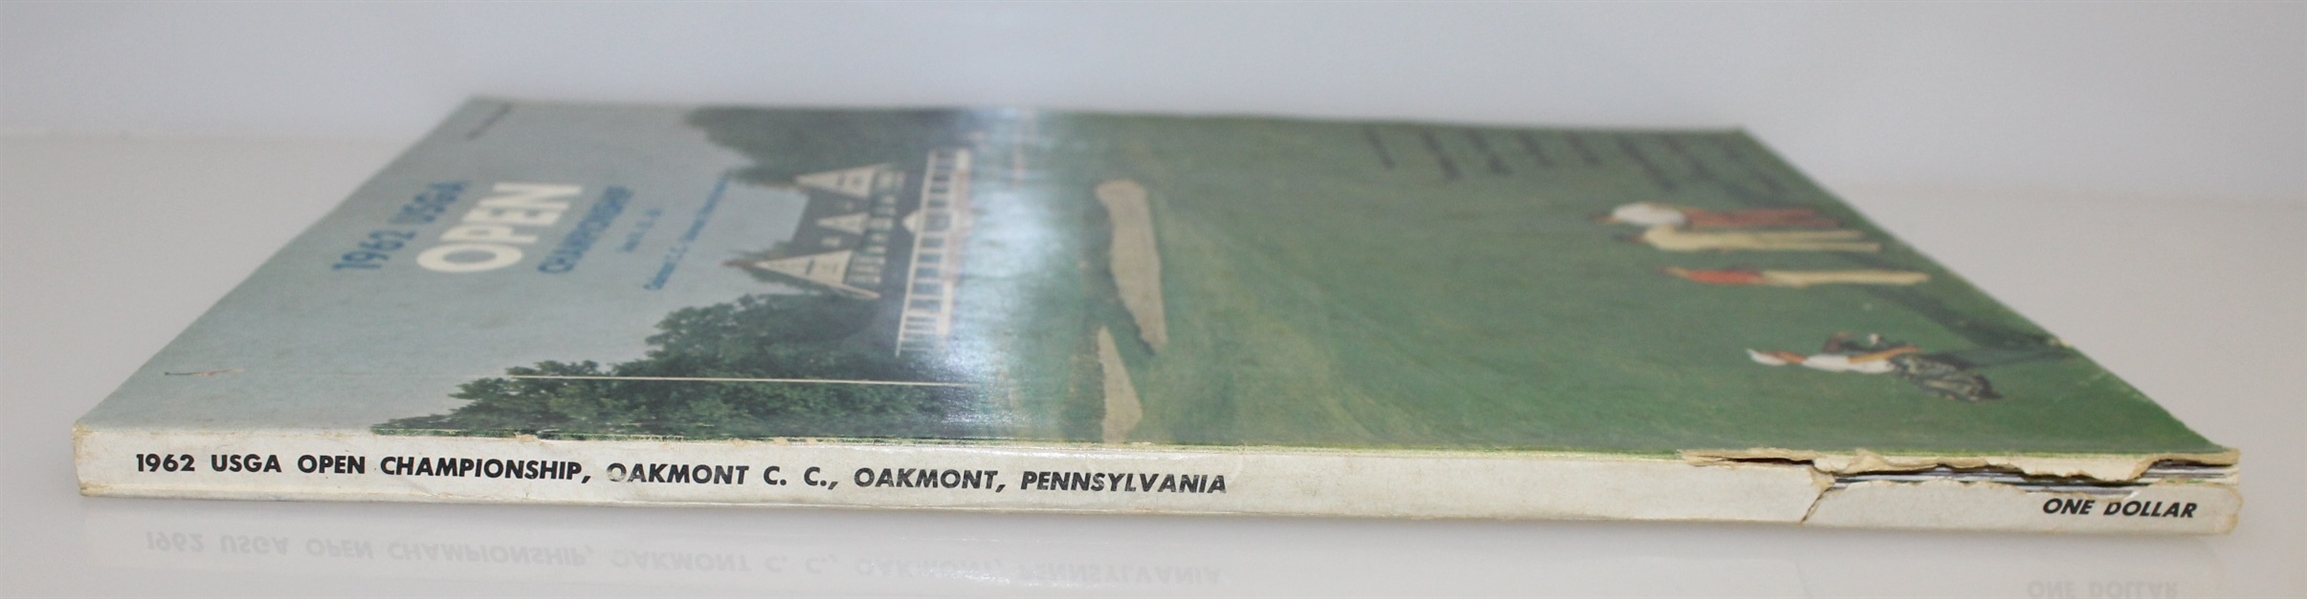 1962 US Open at Oakmont Country Club Program - Jack Nicklaus Win